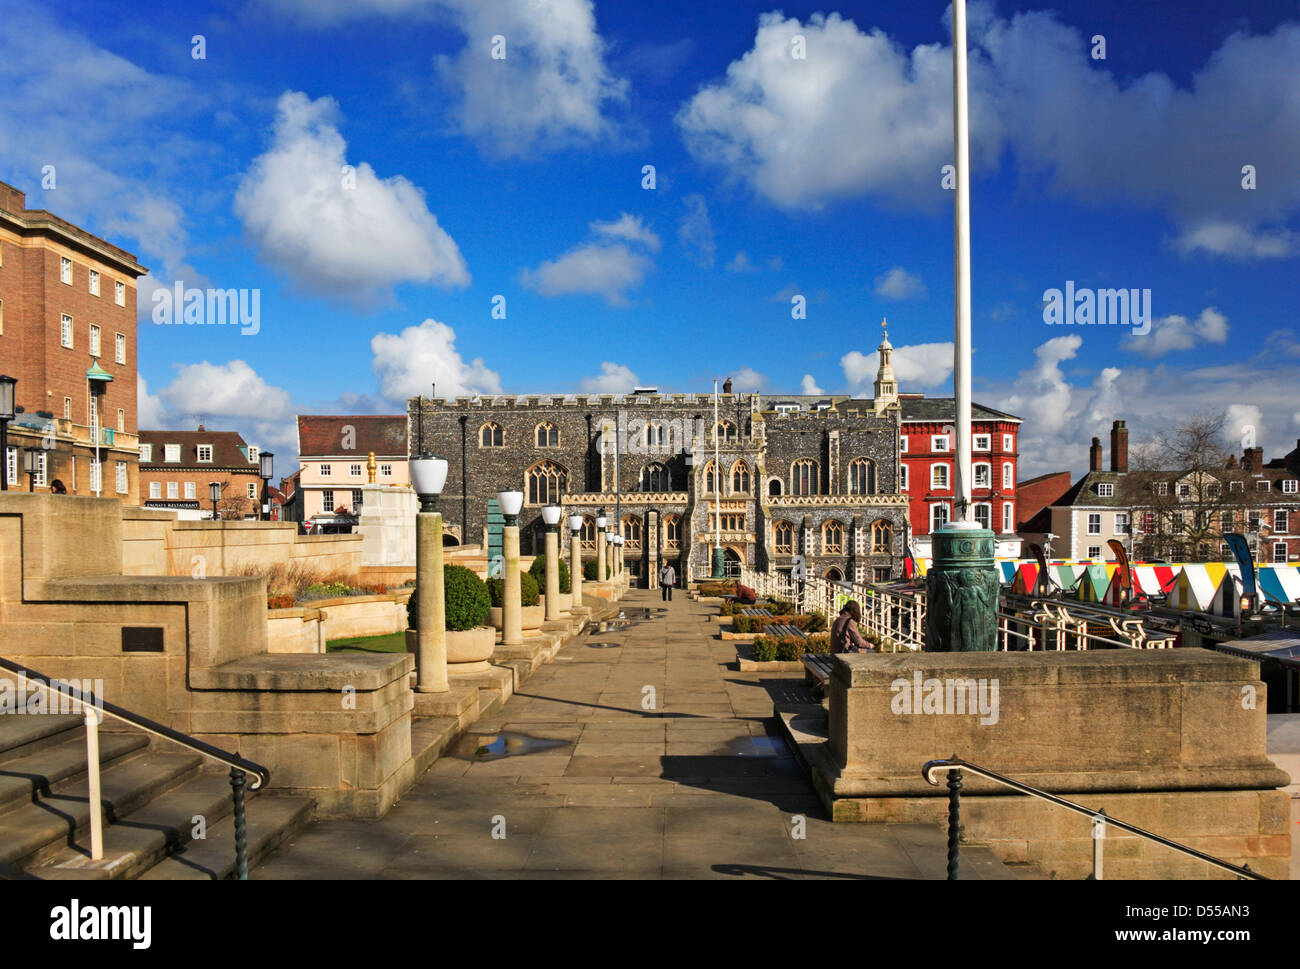 A view of the memorial gardens and Guildhall in the City centre of Norwich, England, United Kingdom. Stock Photo